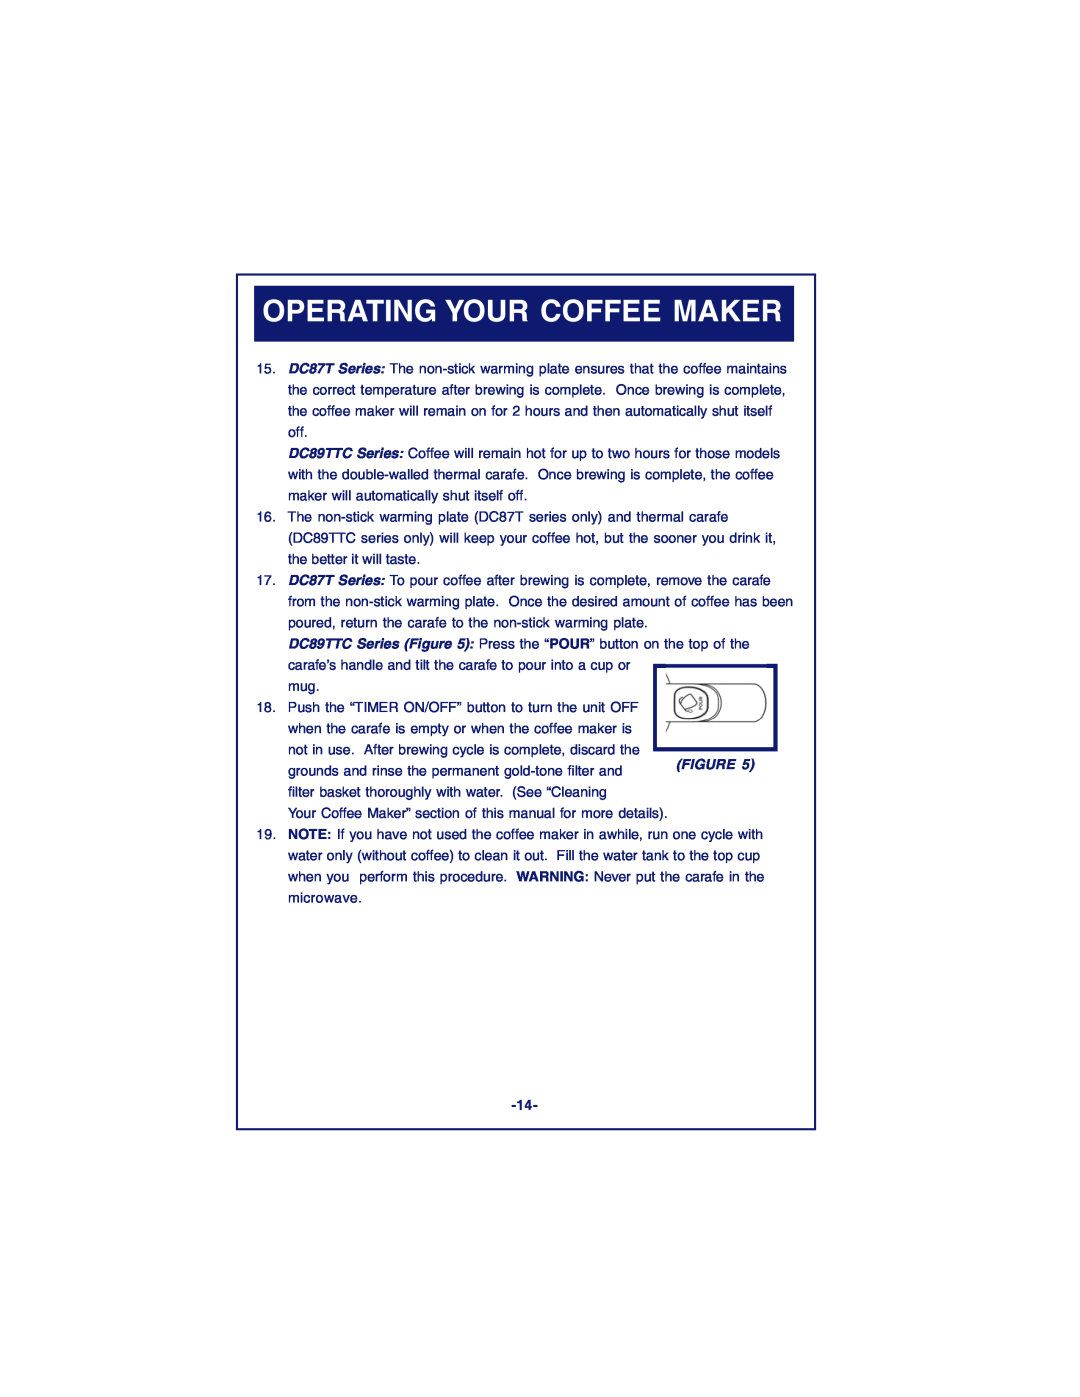 DeLonghi DC87T Series, DC89TTC Series instruction manual Operating Your Coffee Maker 